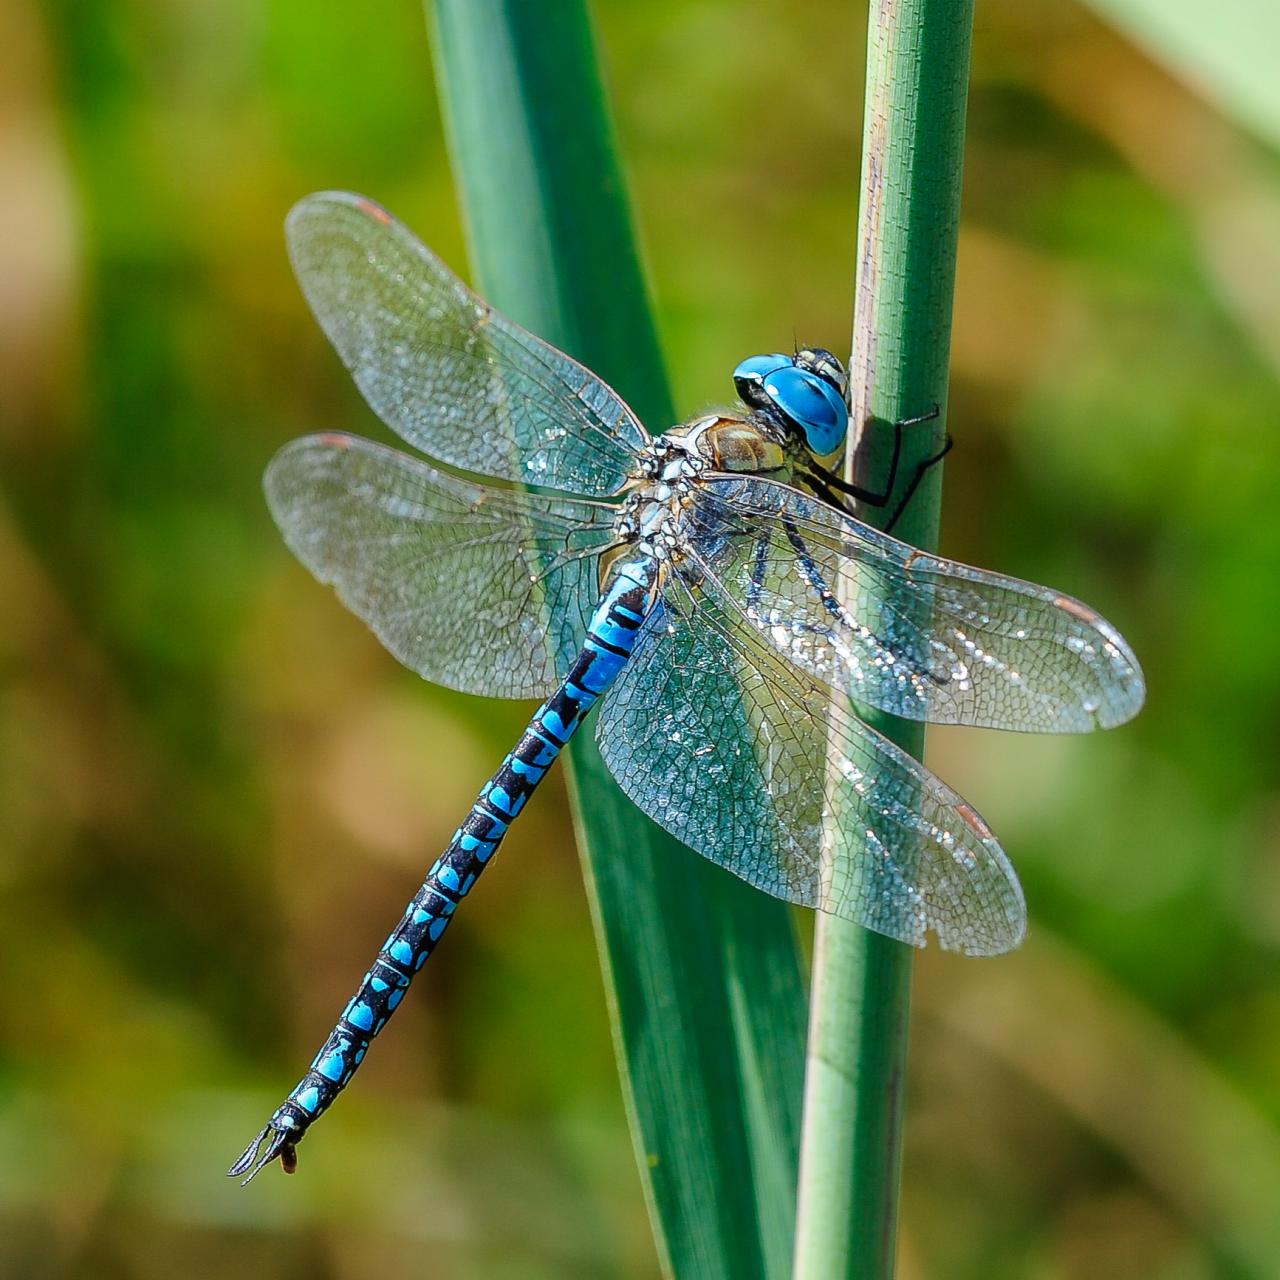 Dragonflies are the Perfect Model for Future Aerial Drones